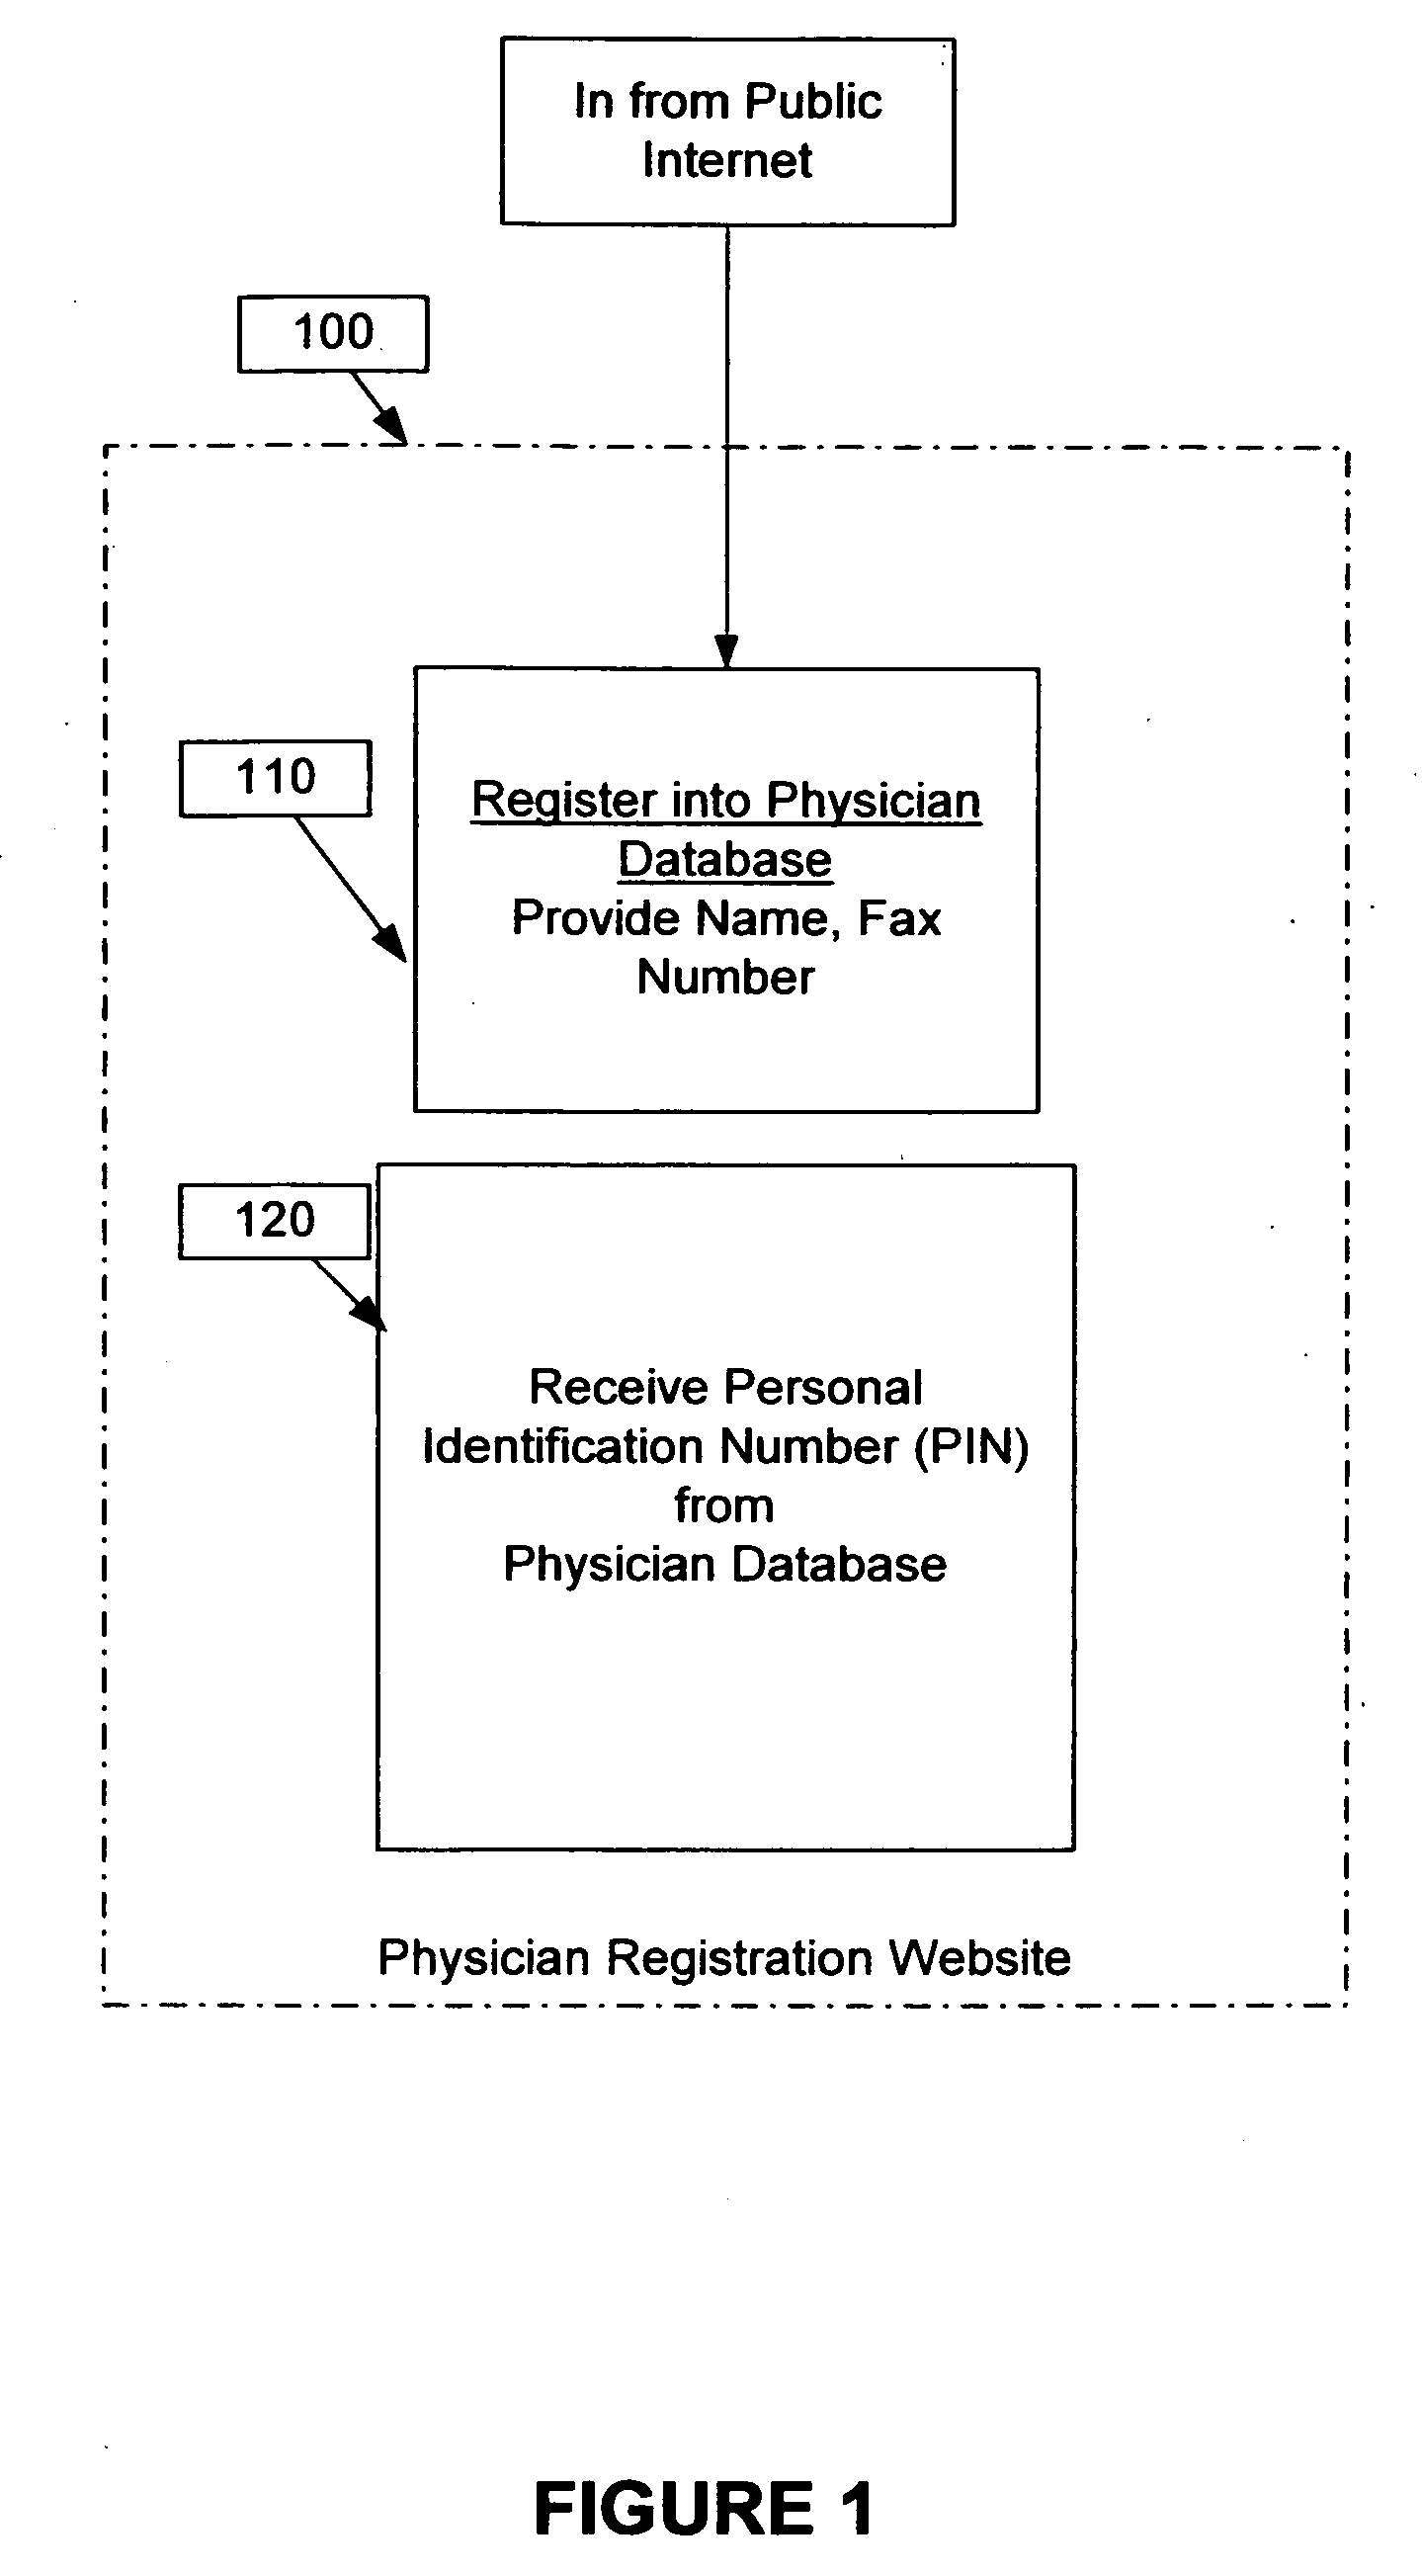 System and method to administer a patient specific anonymous medical questionnaire over the public Internet using manual decryption of user information